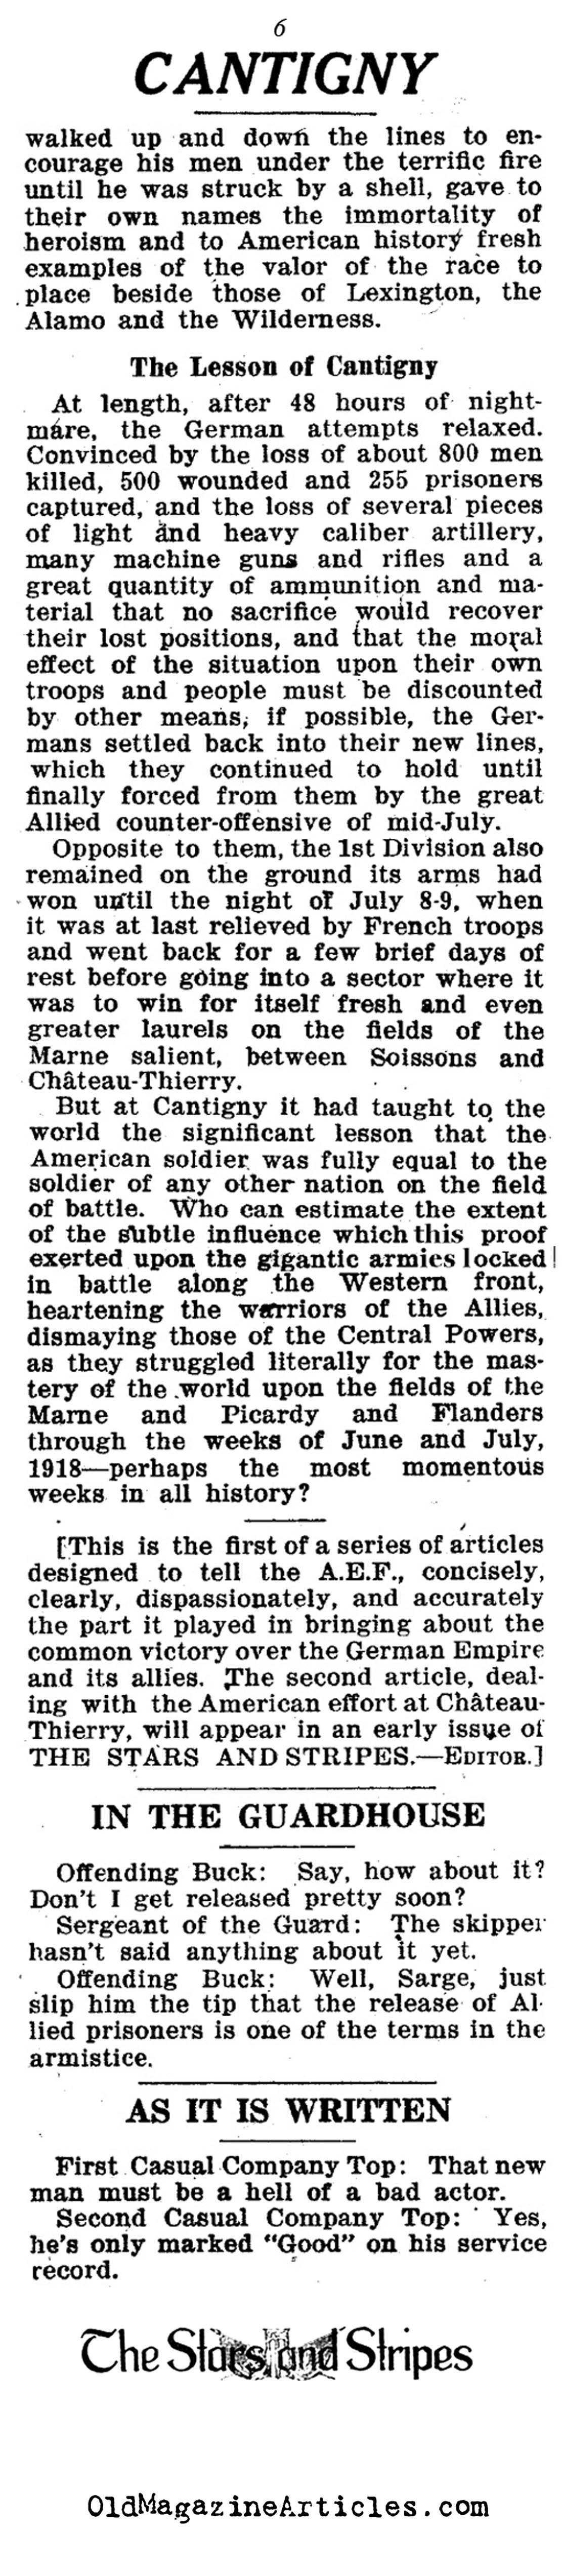 The Battle at Cantigny (The Stars and Stripes, 1918)